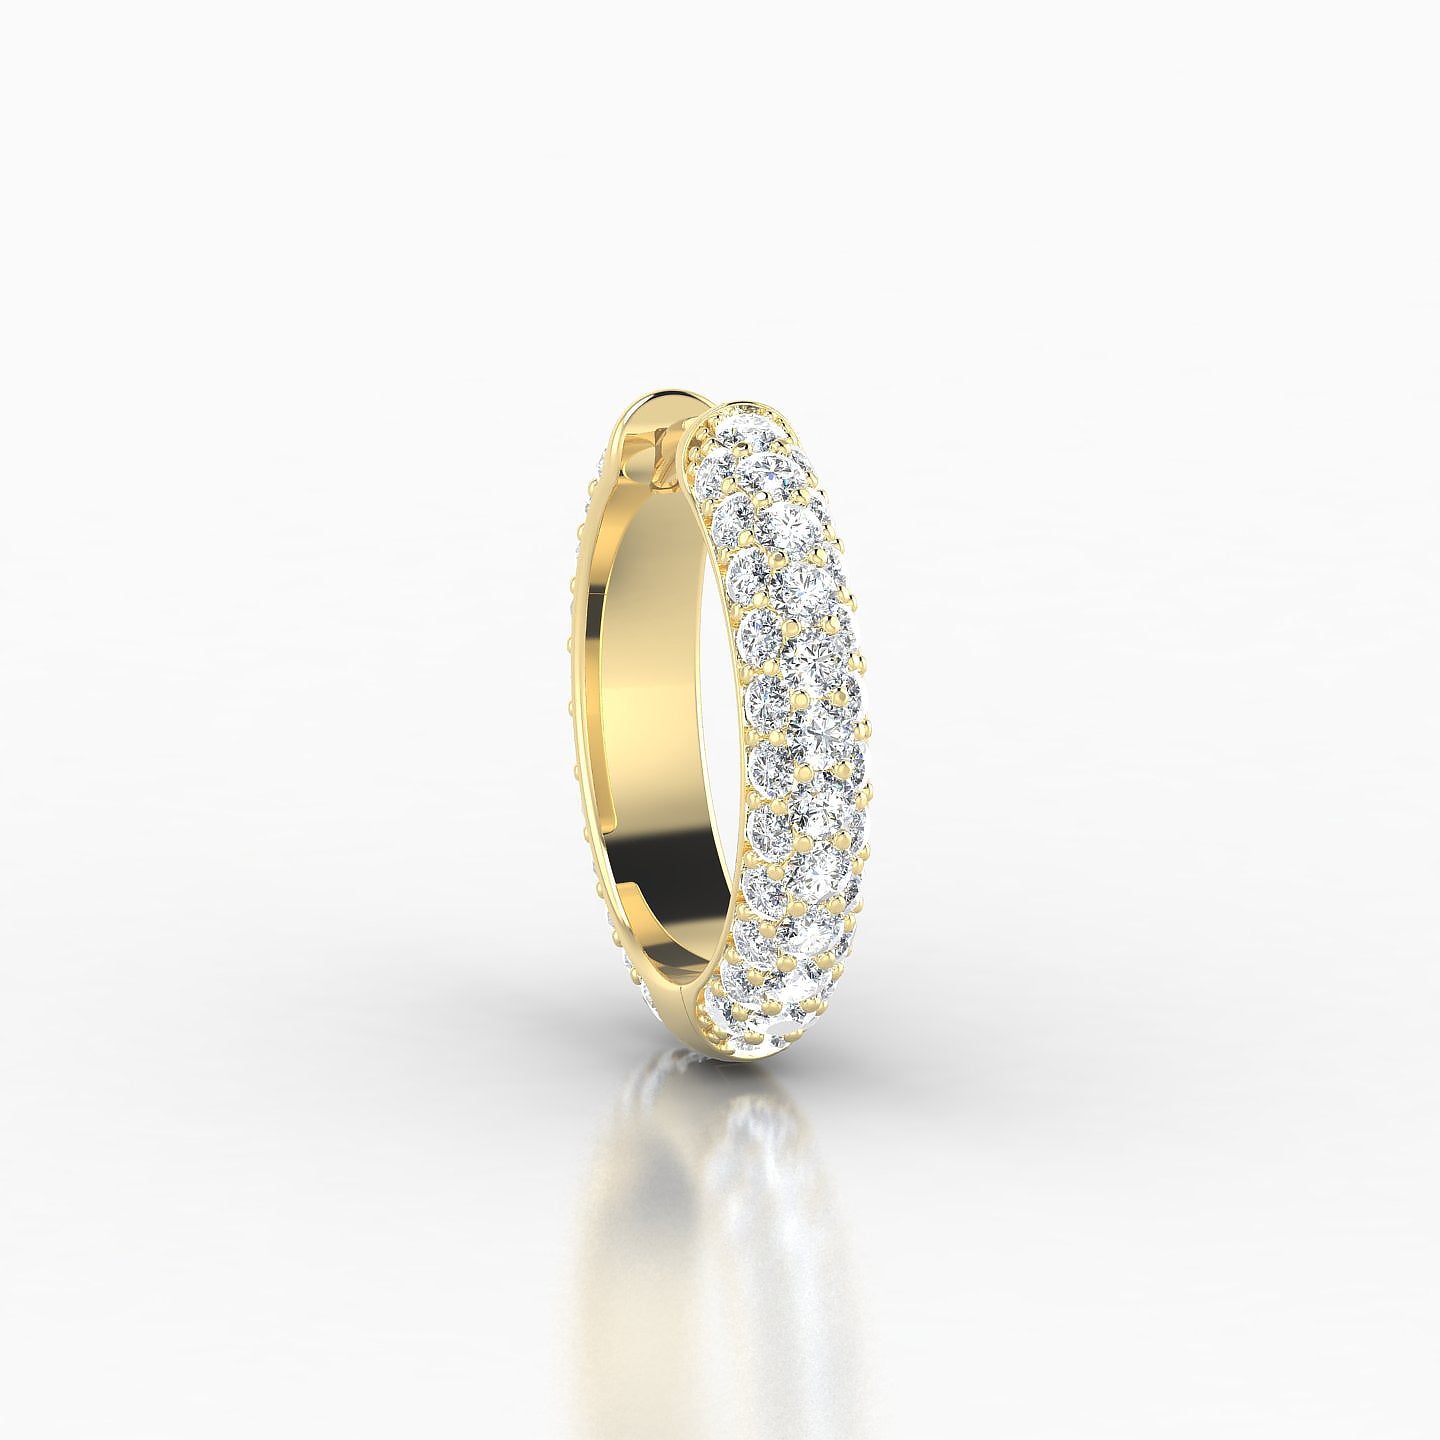 Theia | 18k Yellow Gold 9.5 mm Pave Diamond Nose Ring Piercing